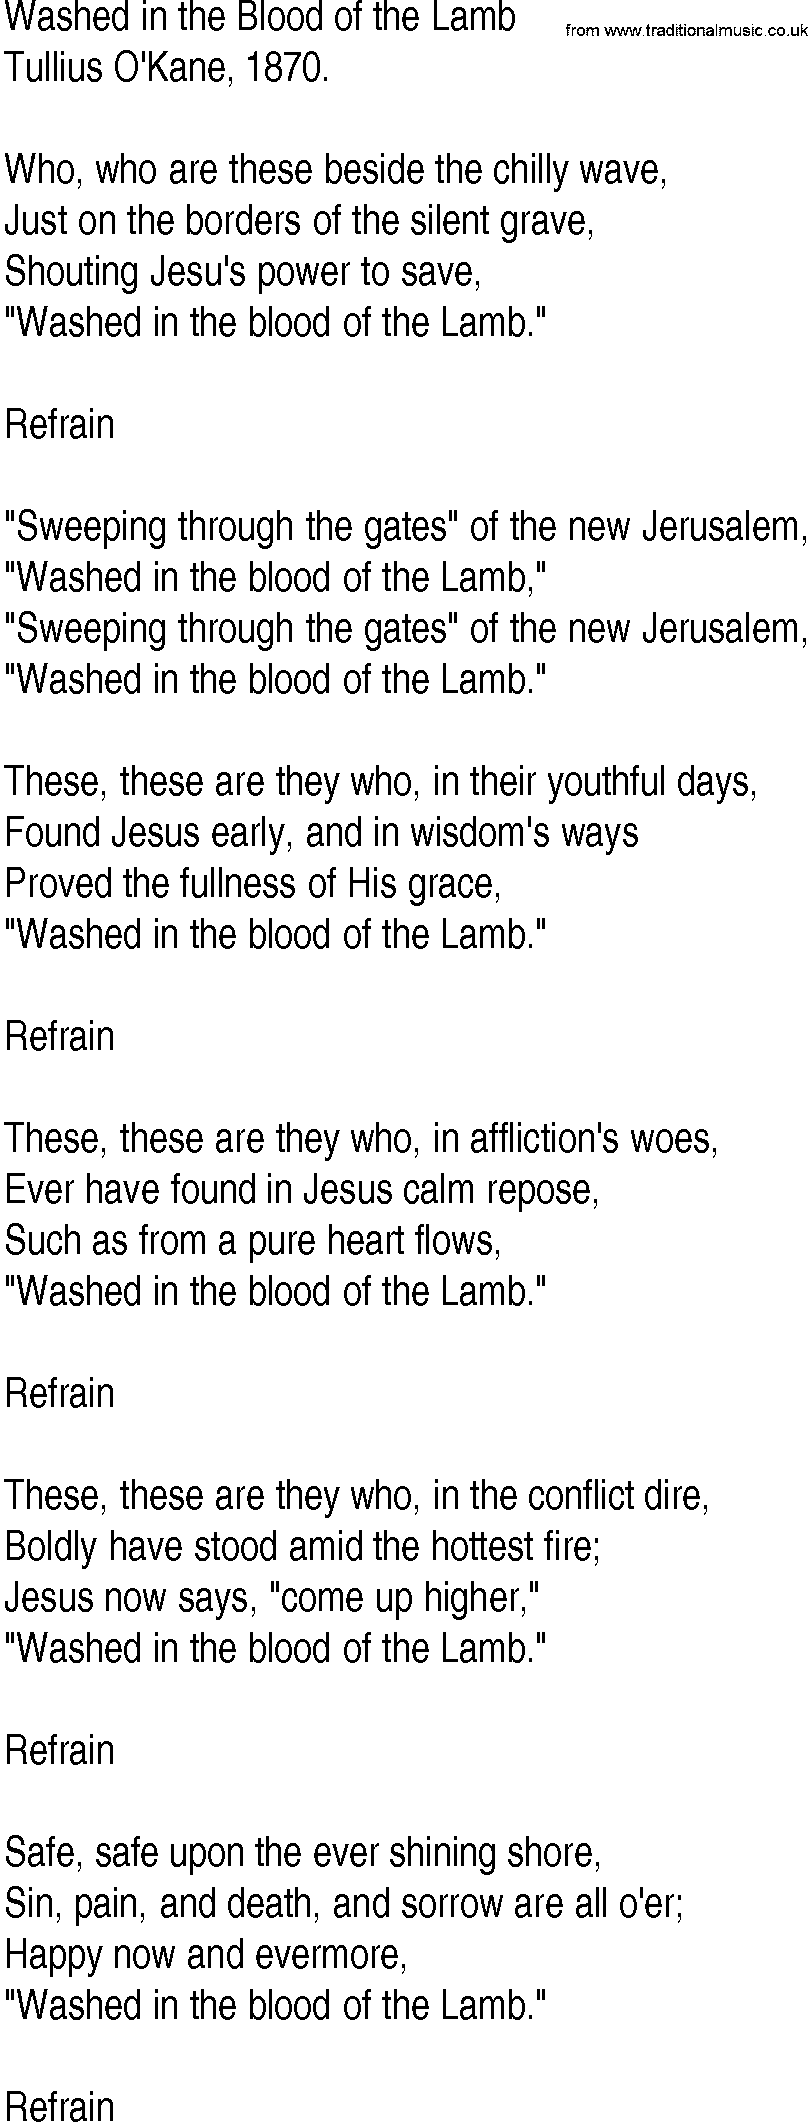 Hymn and Gospel Song: Washed in the Blood of the Lamb by Tullius O'Kane lyrics